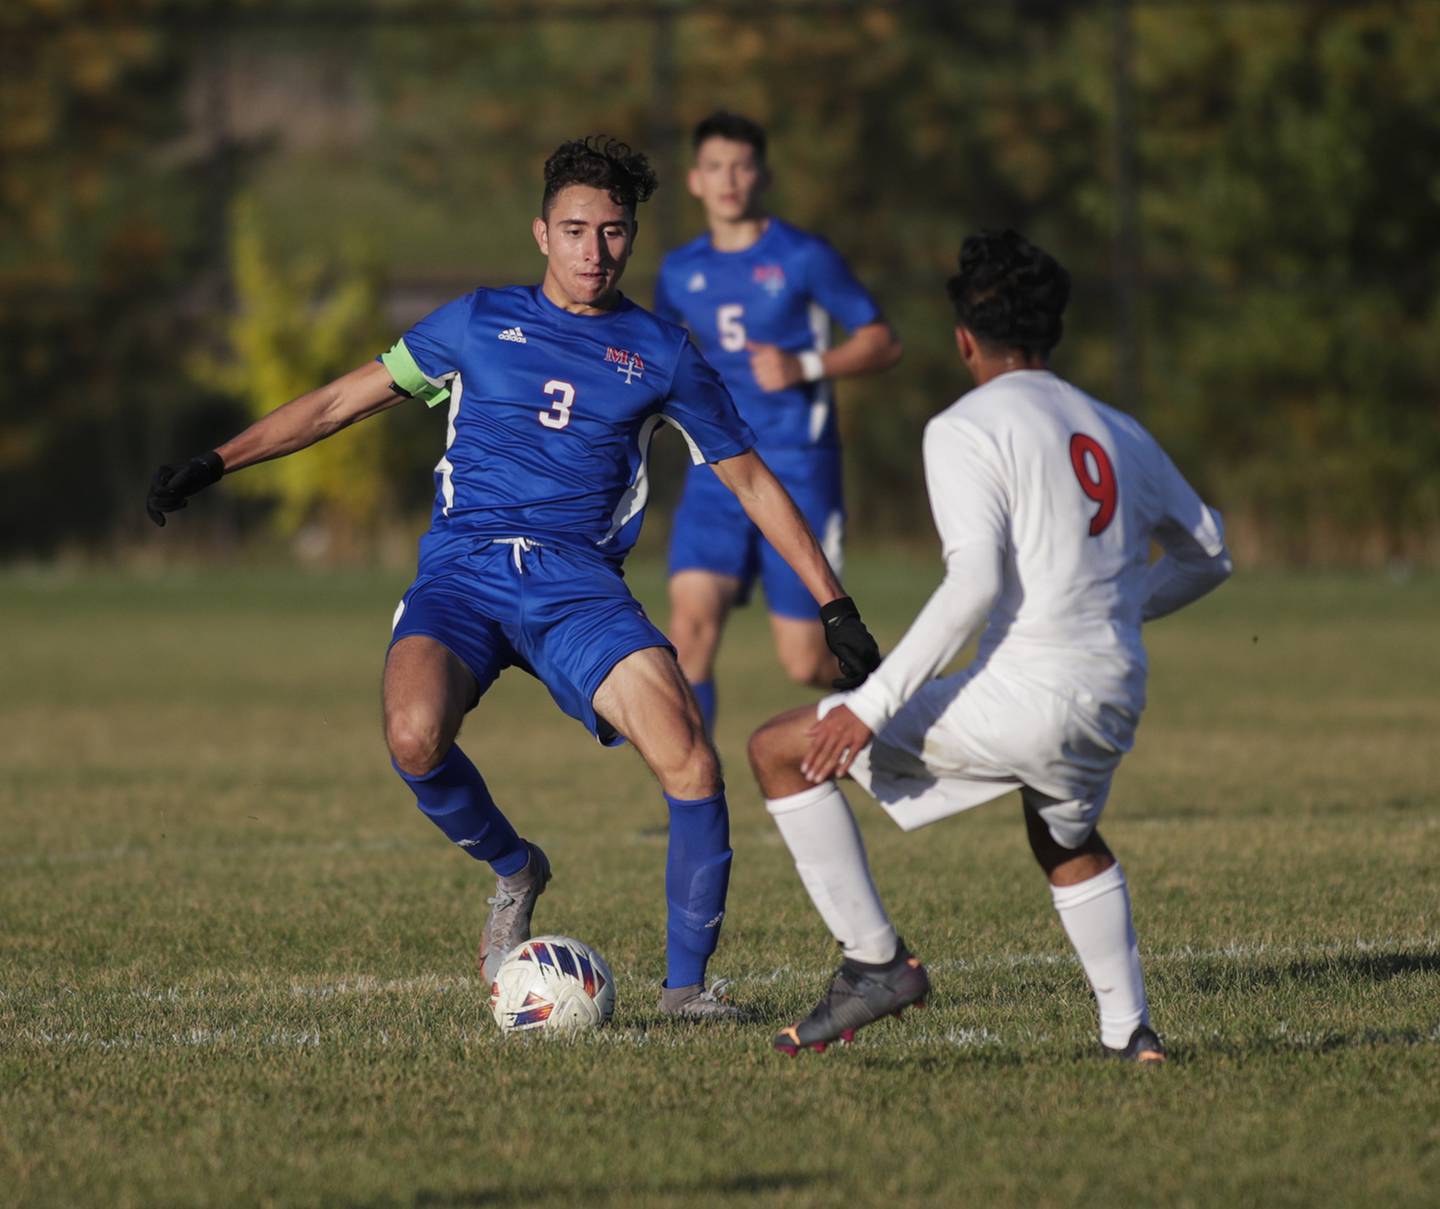 Marmion’s Ricardo Saucedo (3) moves the ball against Oswego’s Jersaih Avalos (9) during a nonconference game in Aurora on Wednesday, Oct. 12, 2022.